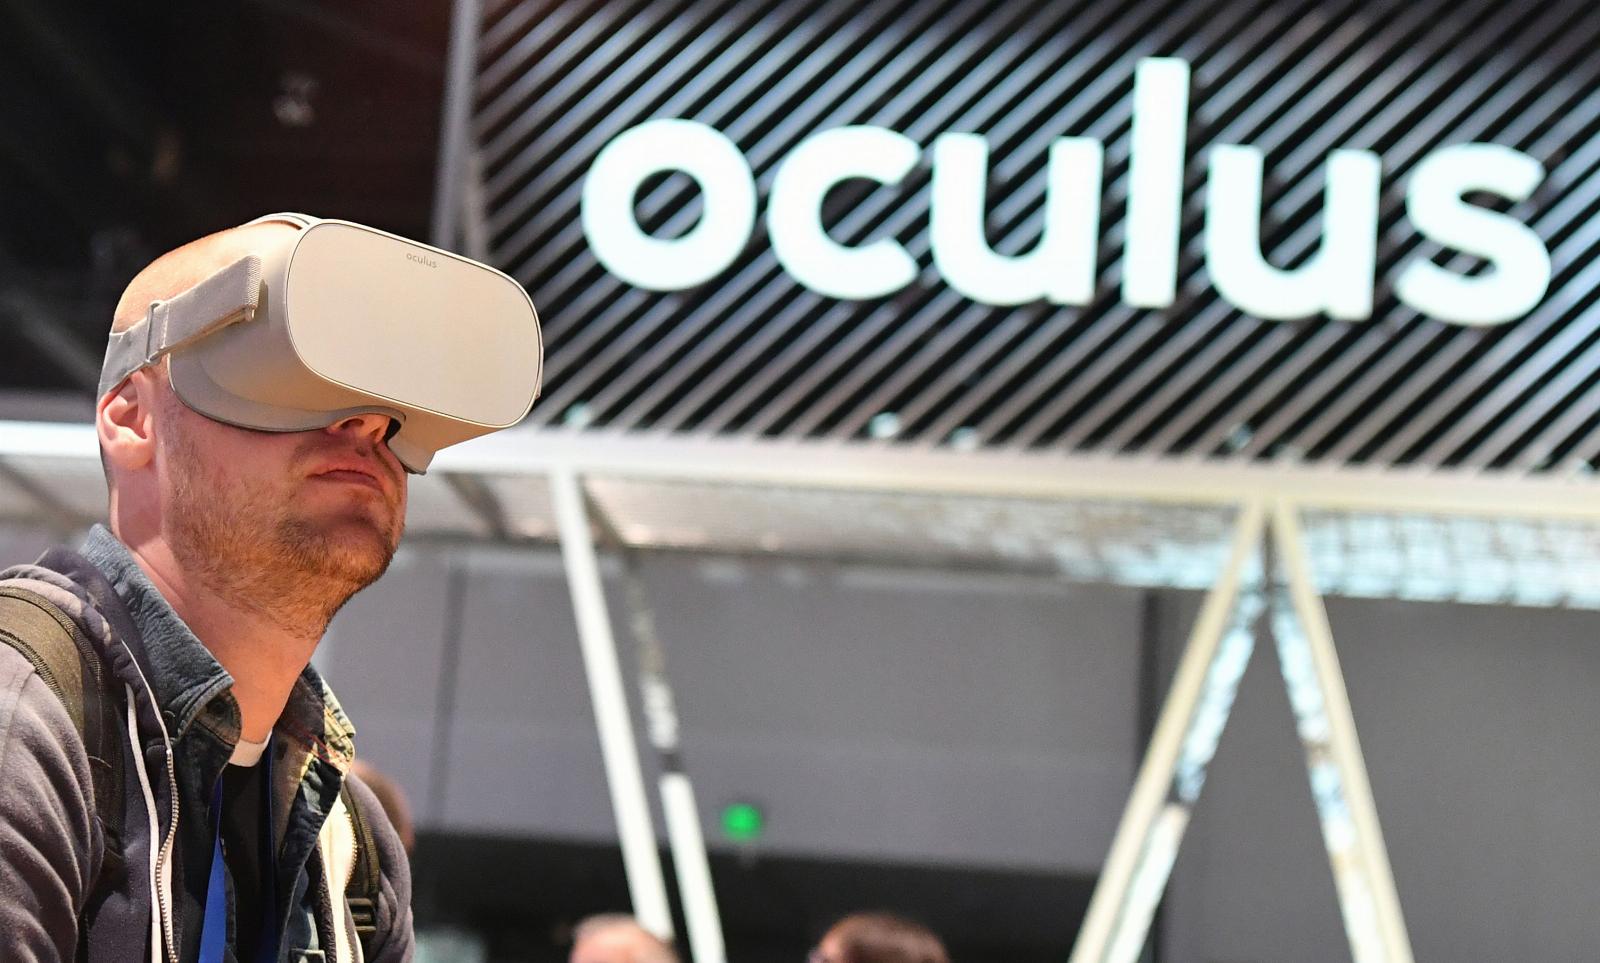 Ten years later, Facebook’s Oculus acquisition hasn’t changed the world as expected